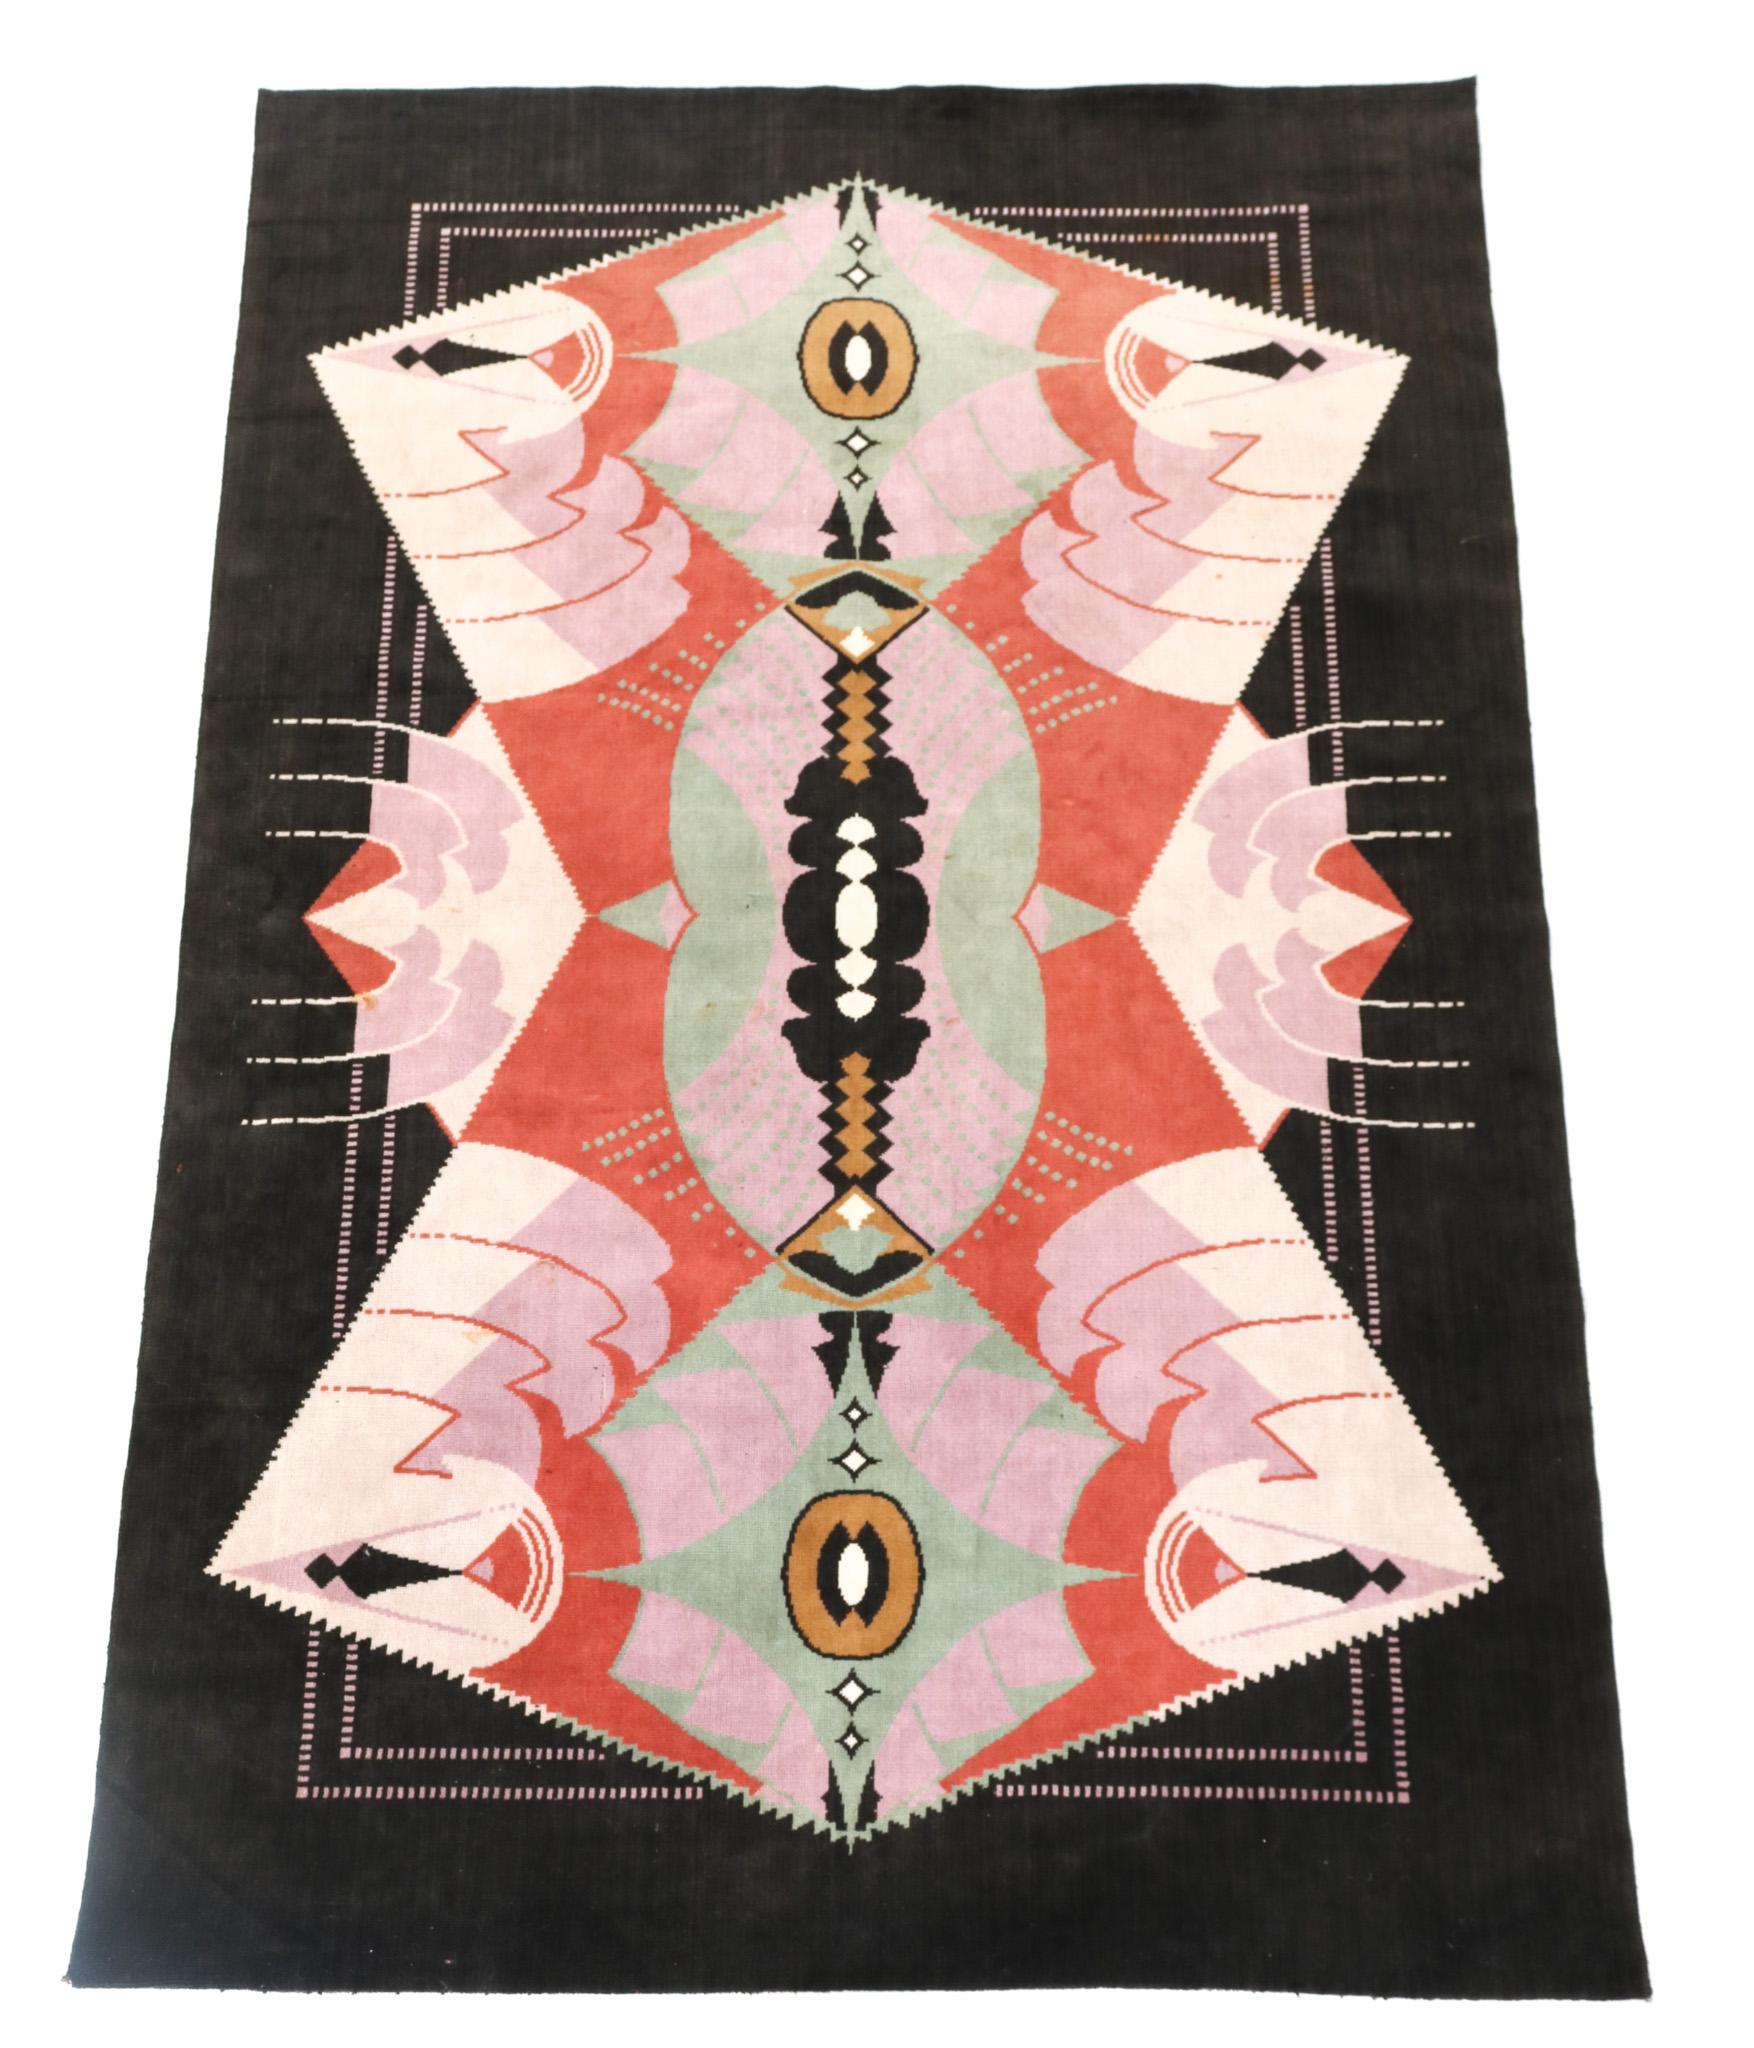 Stunning and rare Art Deco Amsterdamse School wall-hanging model: Nicar.
Design by Jaap Gidding.
Striking Dutch design from the 1920s.
Rectangular shape, central curvilinear and geometrical decoration, polychrome on a black velvet ground.
This